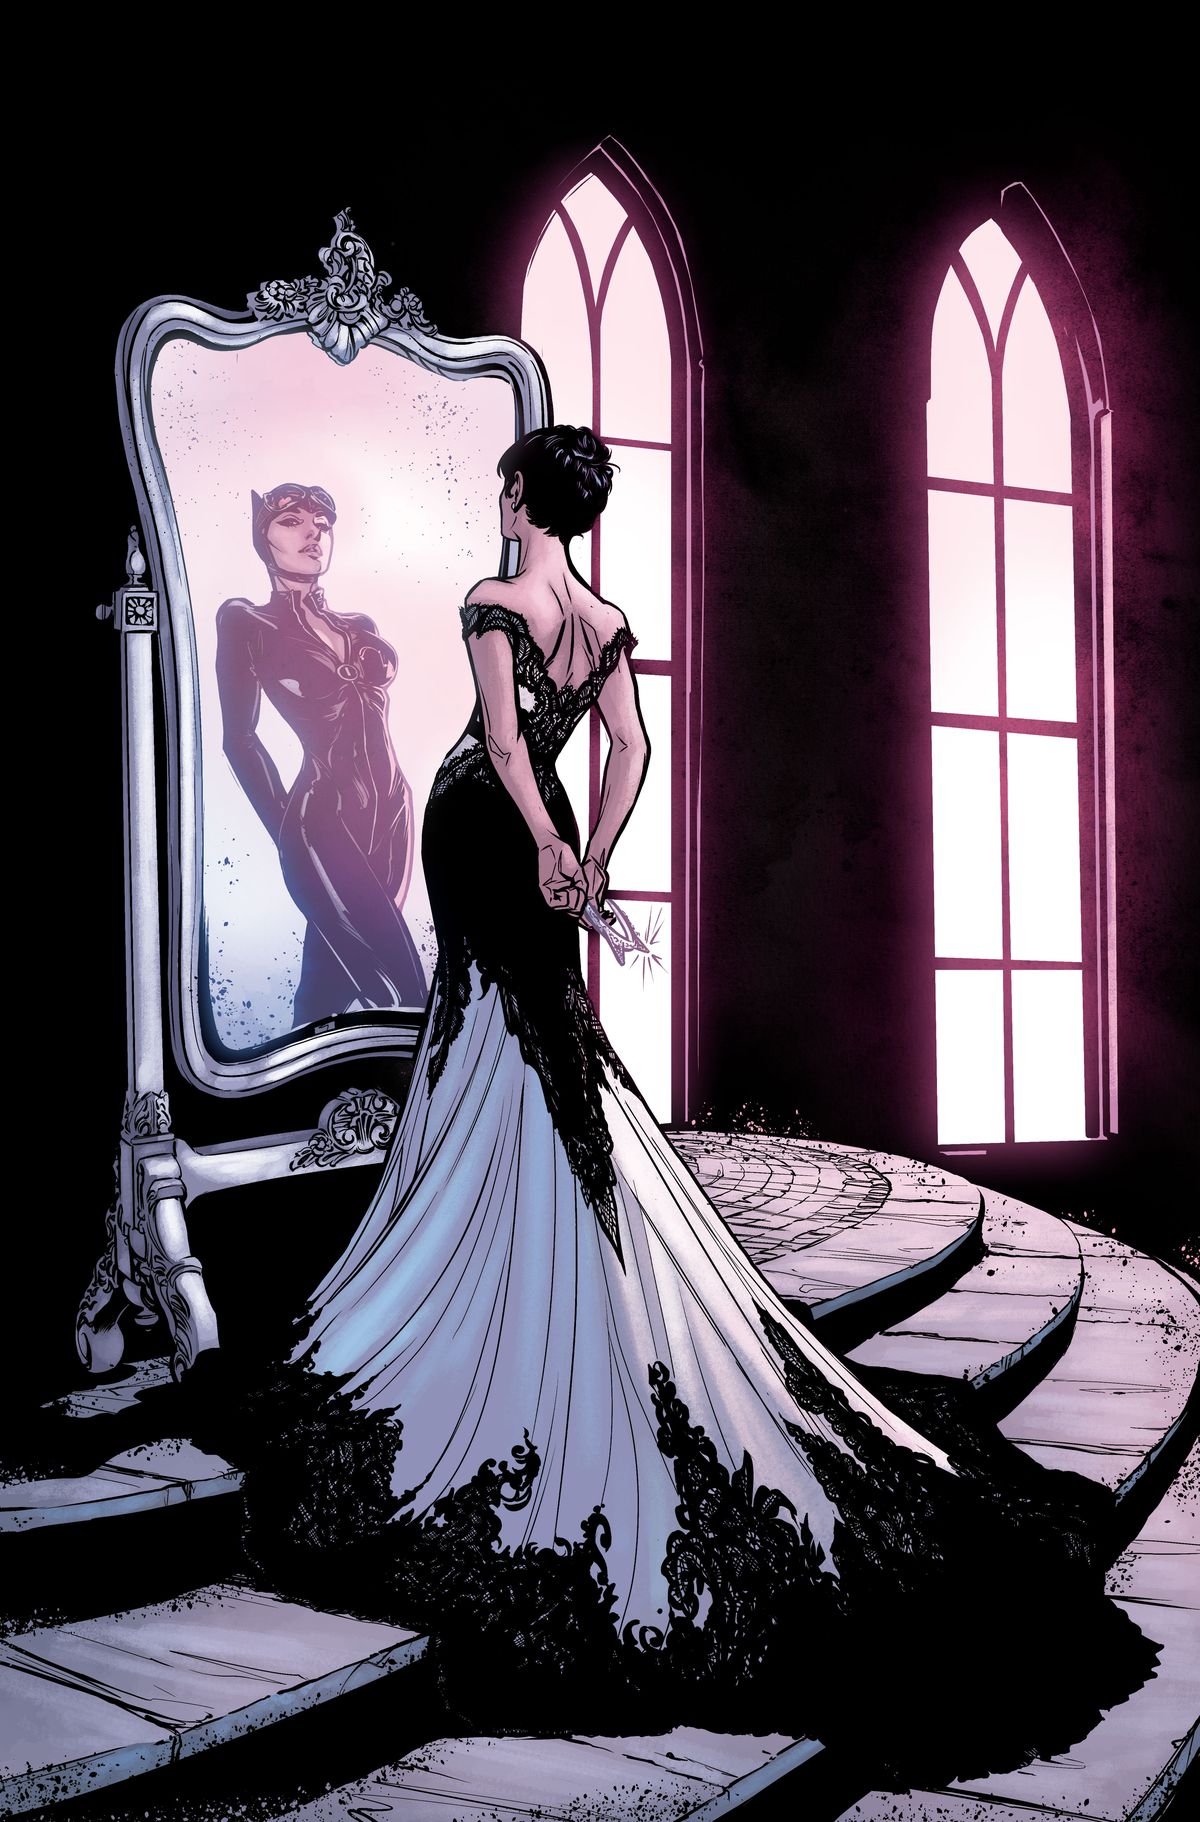 Catwoman in her wedding dress on the cover of Batman #44, DC Comics, 2018. 